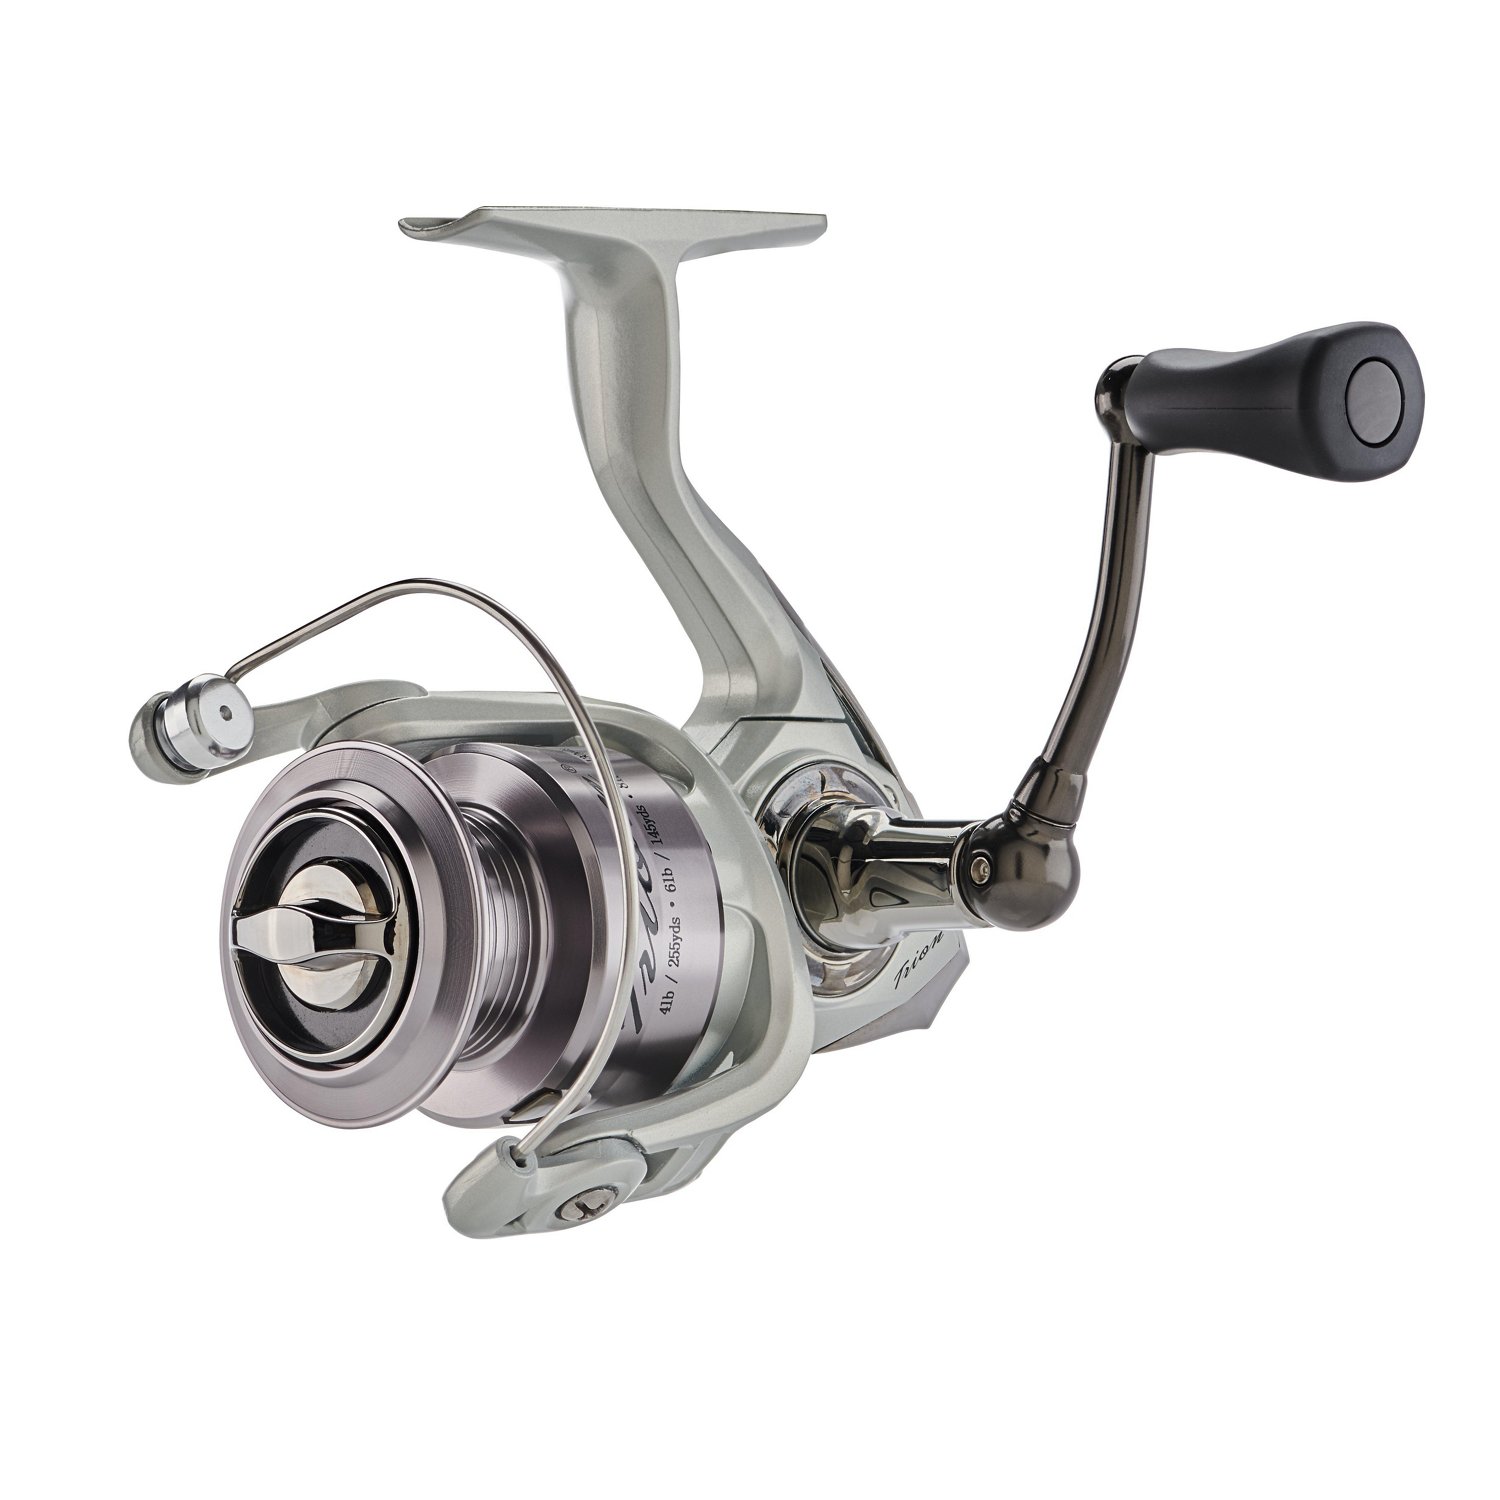 https://academy.scene7.com/is/image/academy//fishing-reels/pflueger-trion-spinning-reel-trionsp40x-/dab81d06-cc1f-4a20-82ae-77cd45a66b98